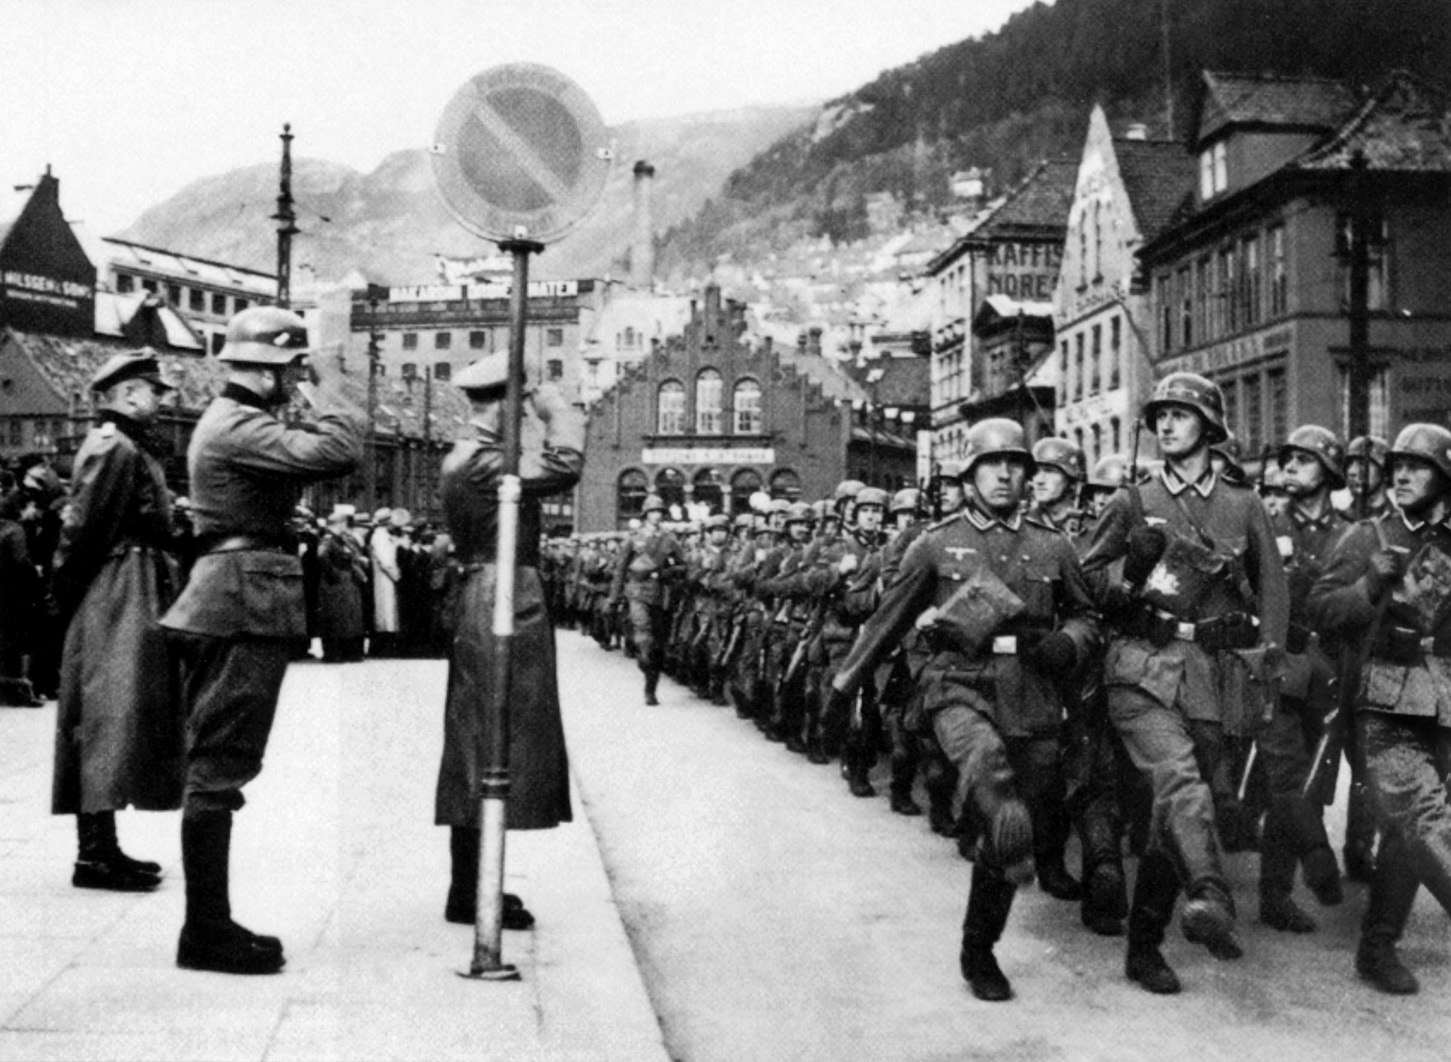 Goose-stepping German soldiers parade through the streets of Bergen, Norway, after occupying the country in a swift operation that began on April 9, 1940.